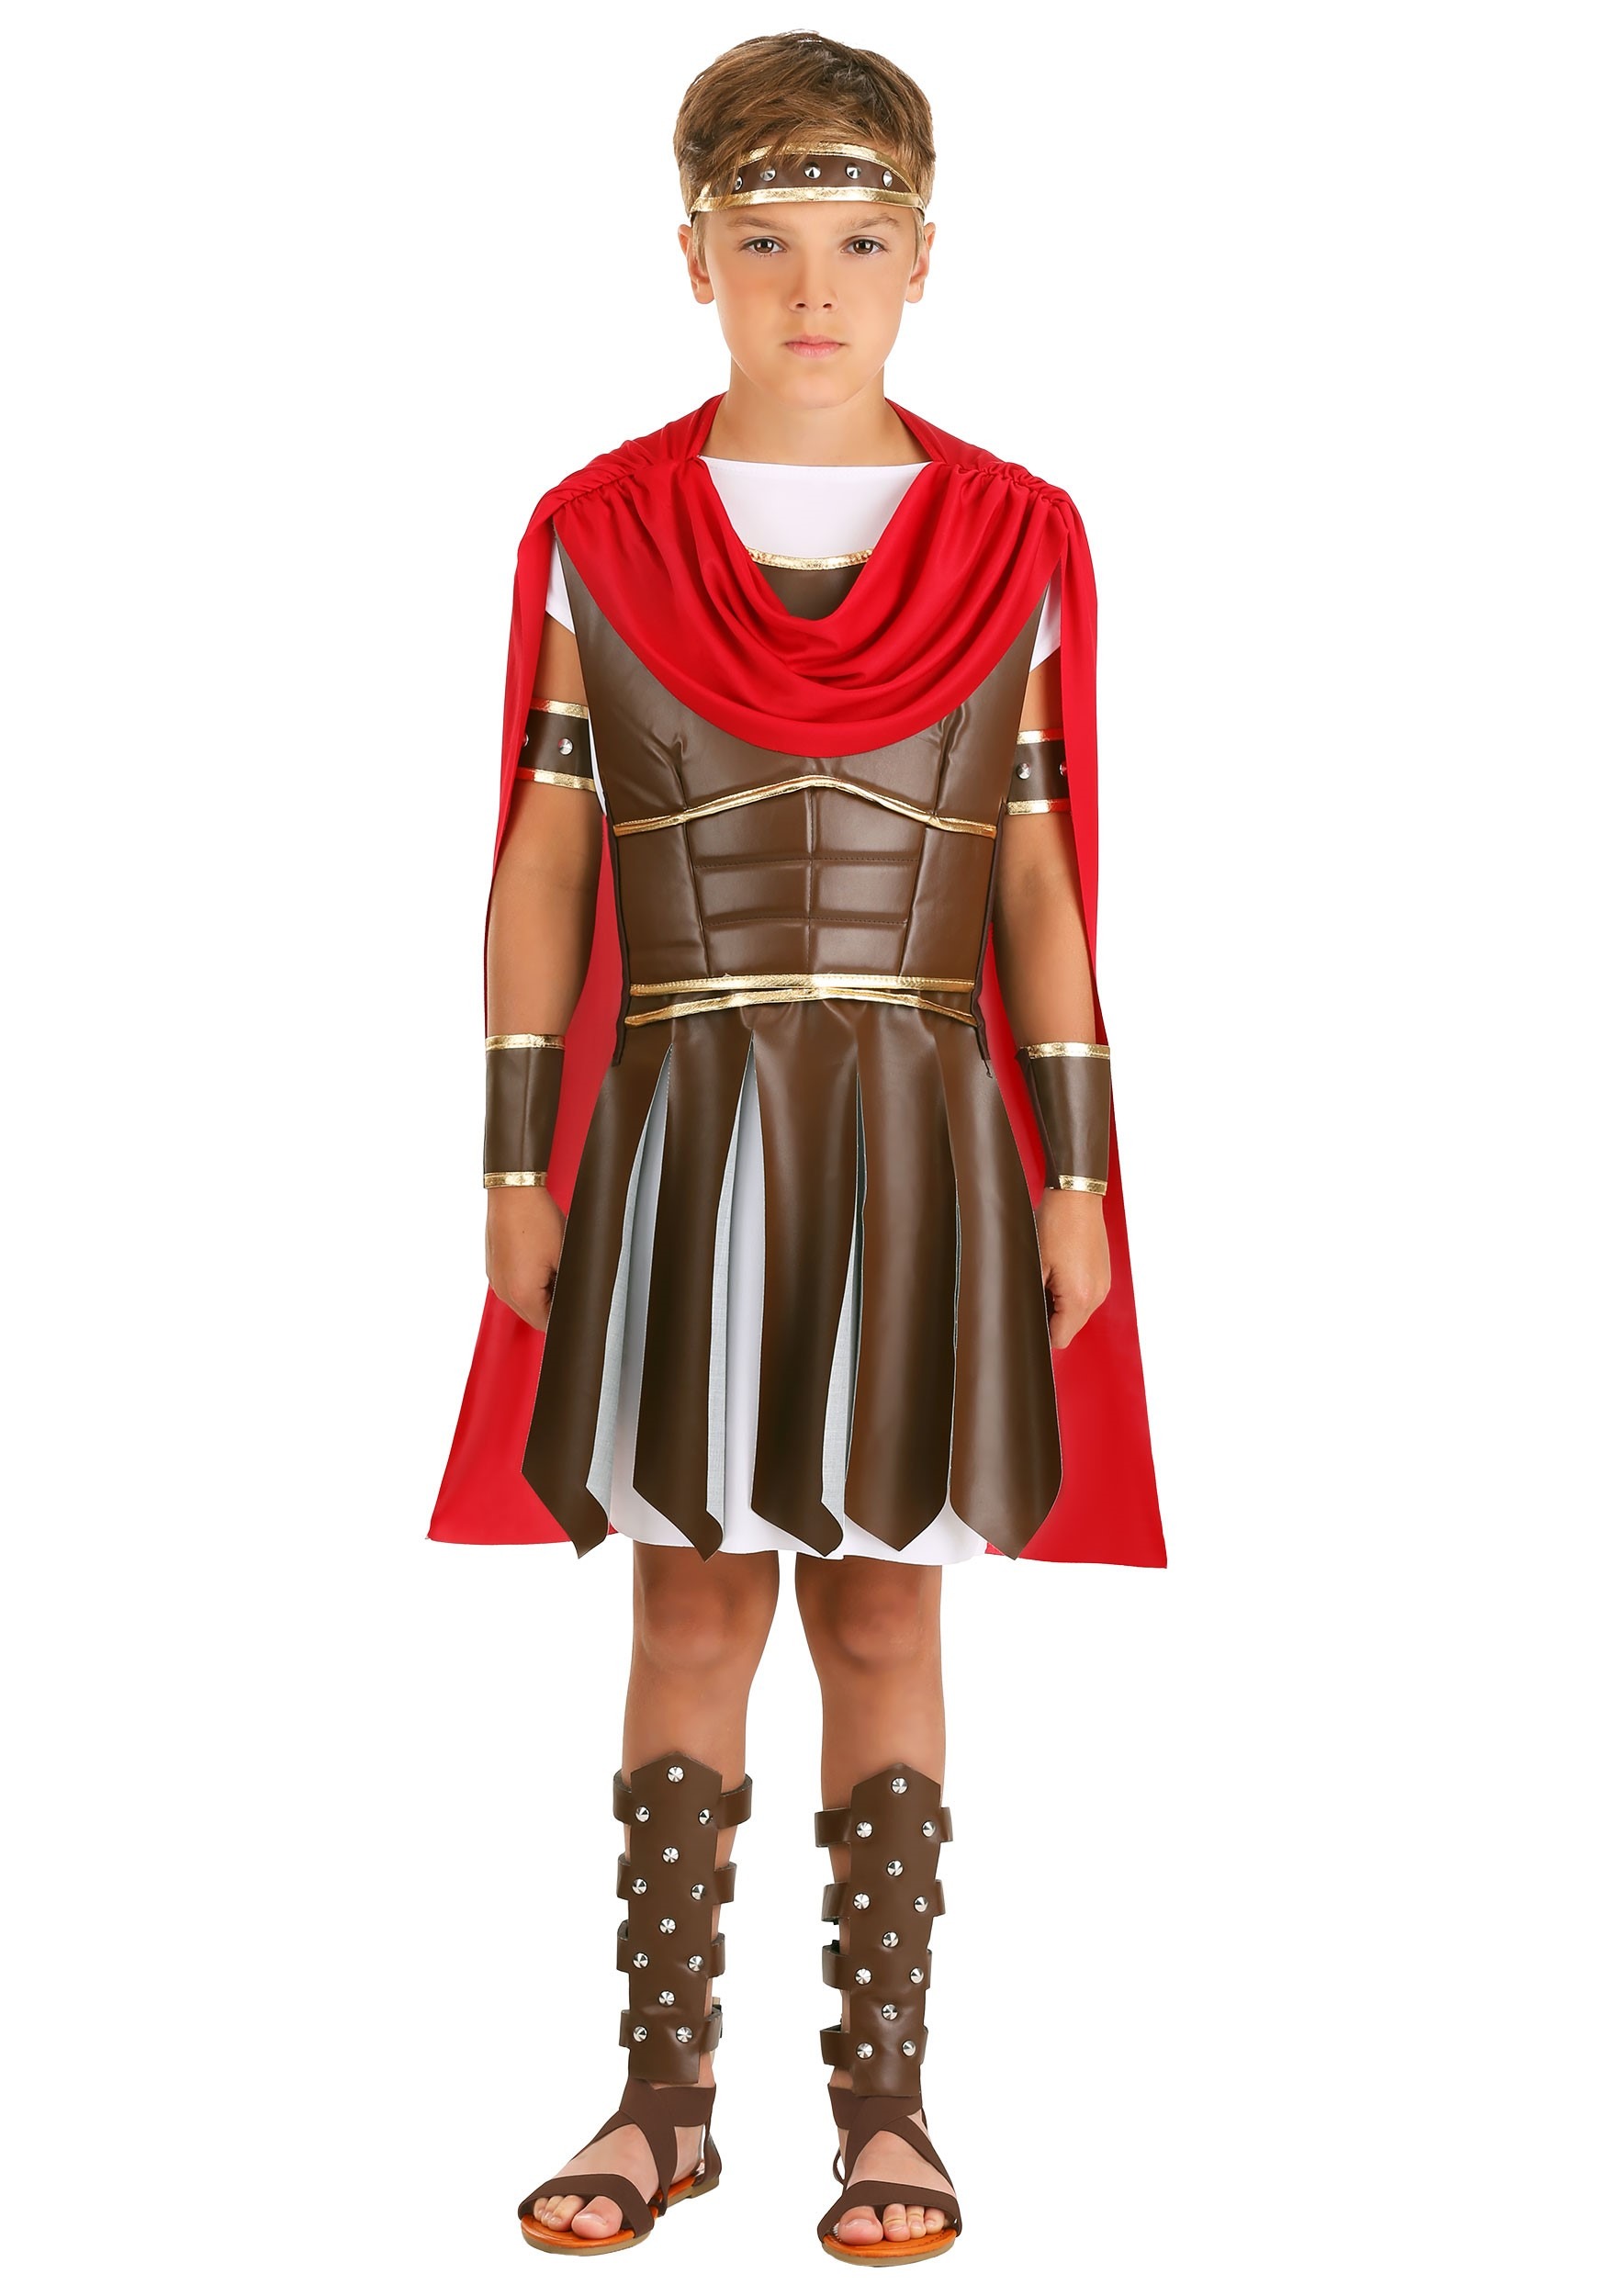 Photos - Fancy Dress California Costume Collection Roman Warrior Costume for Boys Brown/Red 